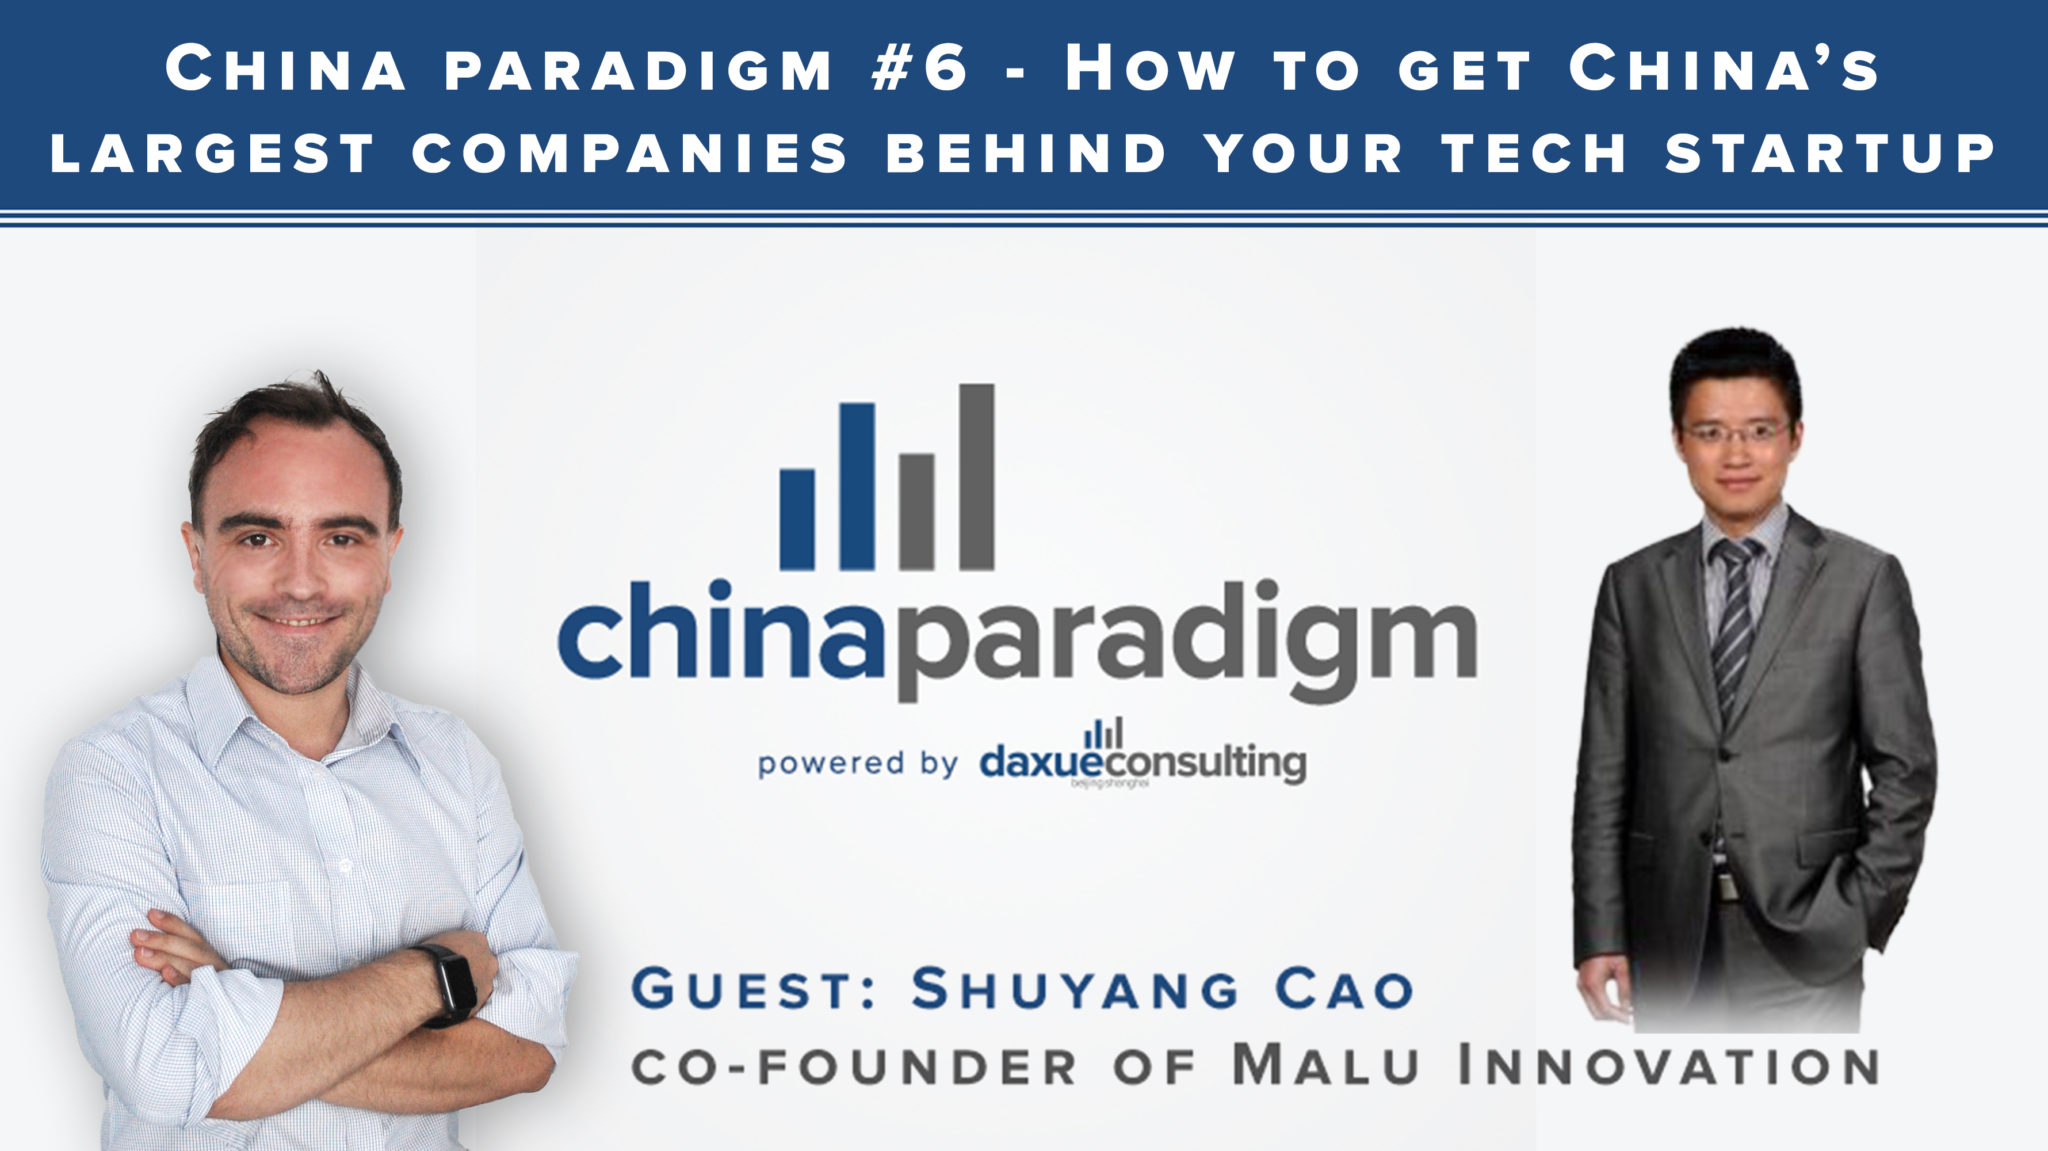 [Podcast] China paradigm #6: How to get China’s largest companies behind your tech startup